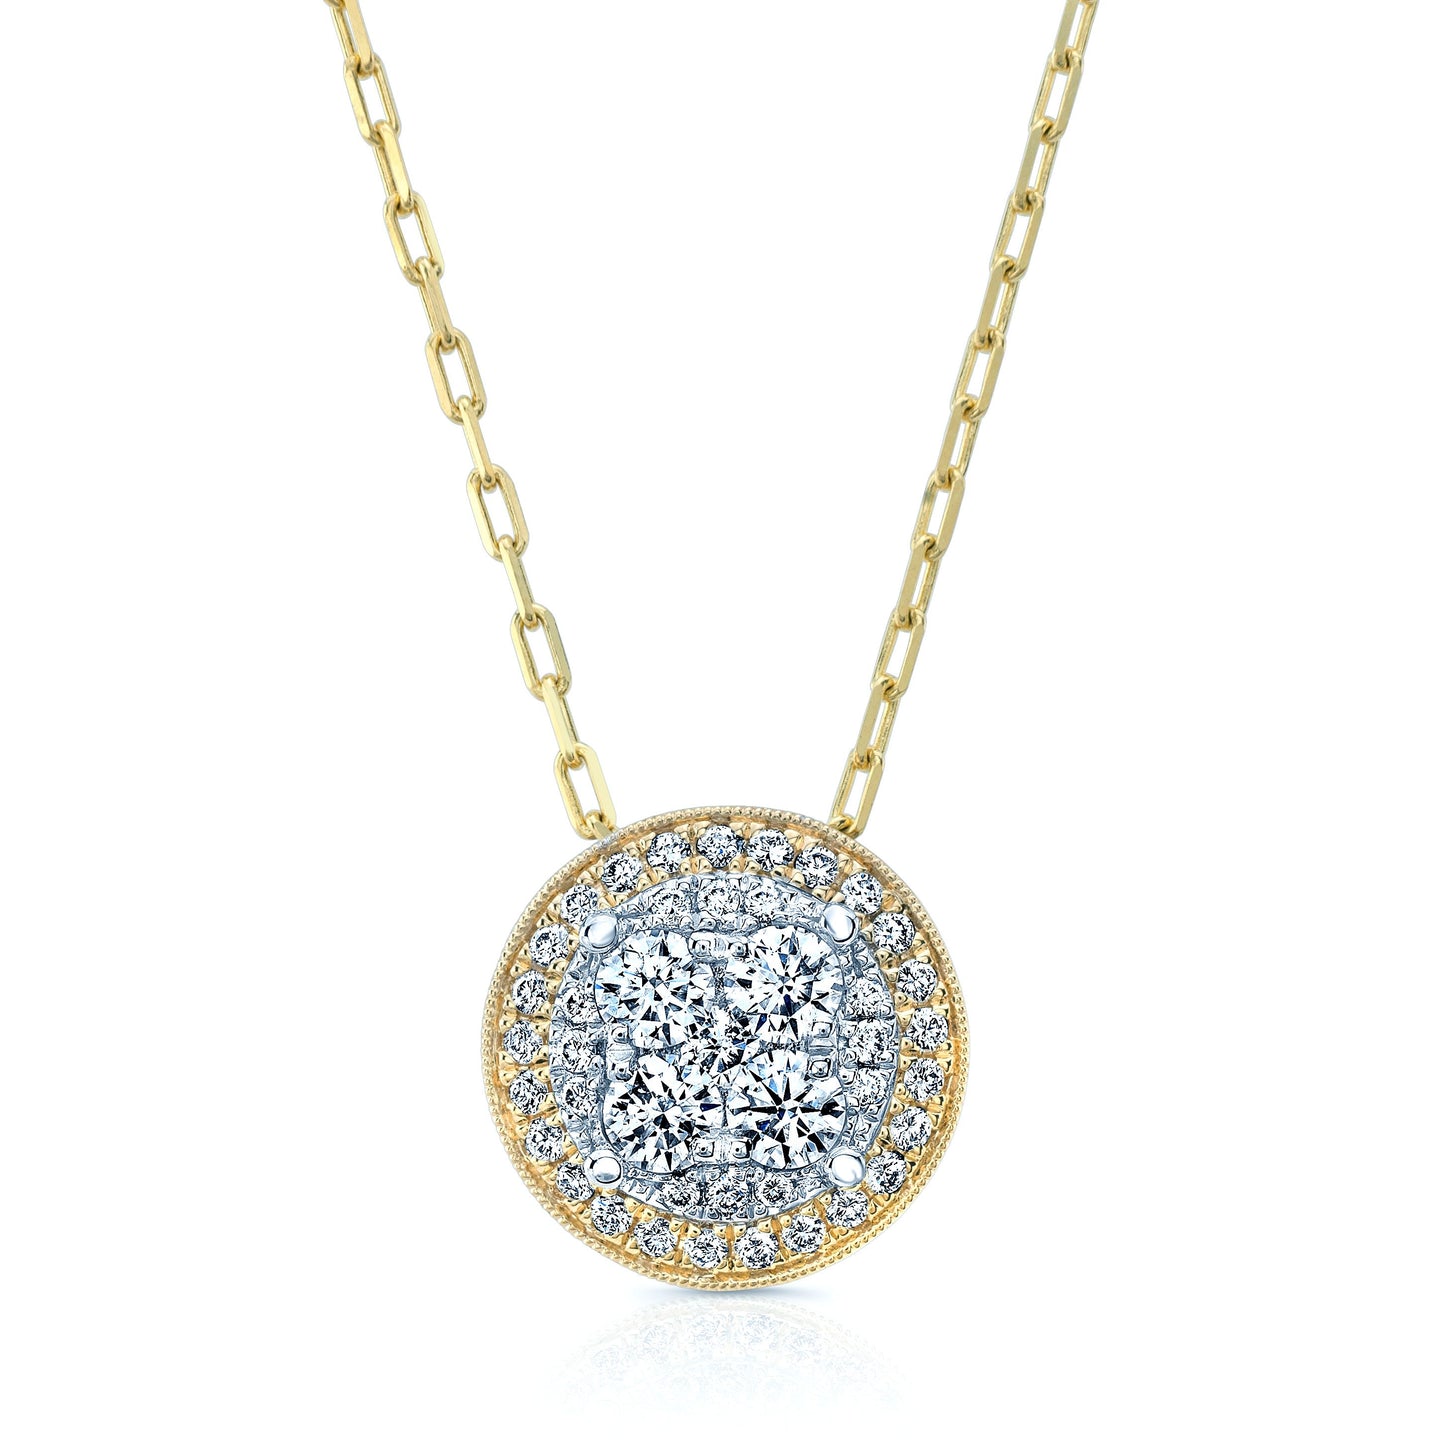 Round Diamond Halo Cluster Pendant In 14k Two Tone Gold Adj 16-18 Inch Chain(5/8 Ct.tw.)